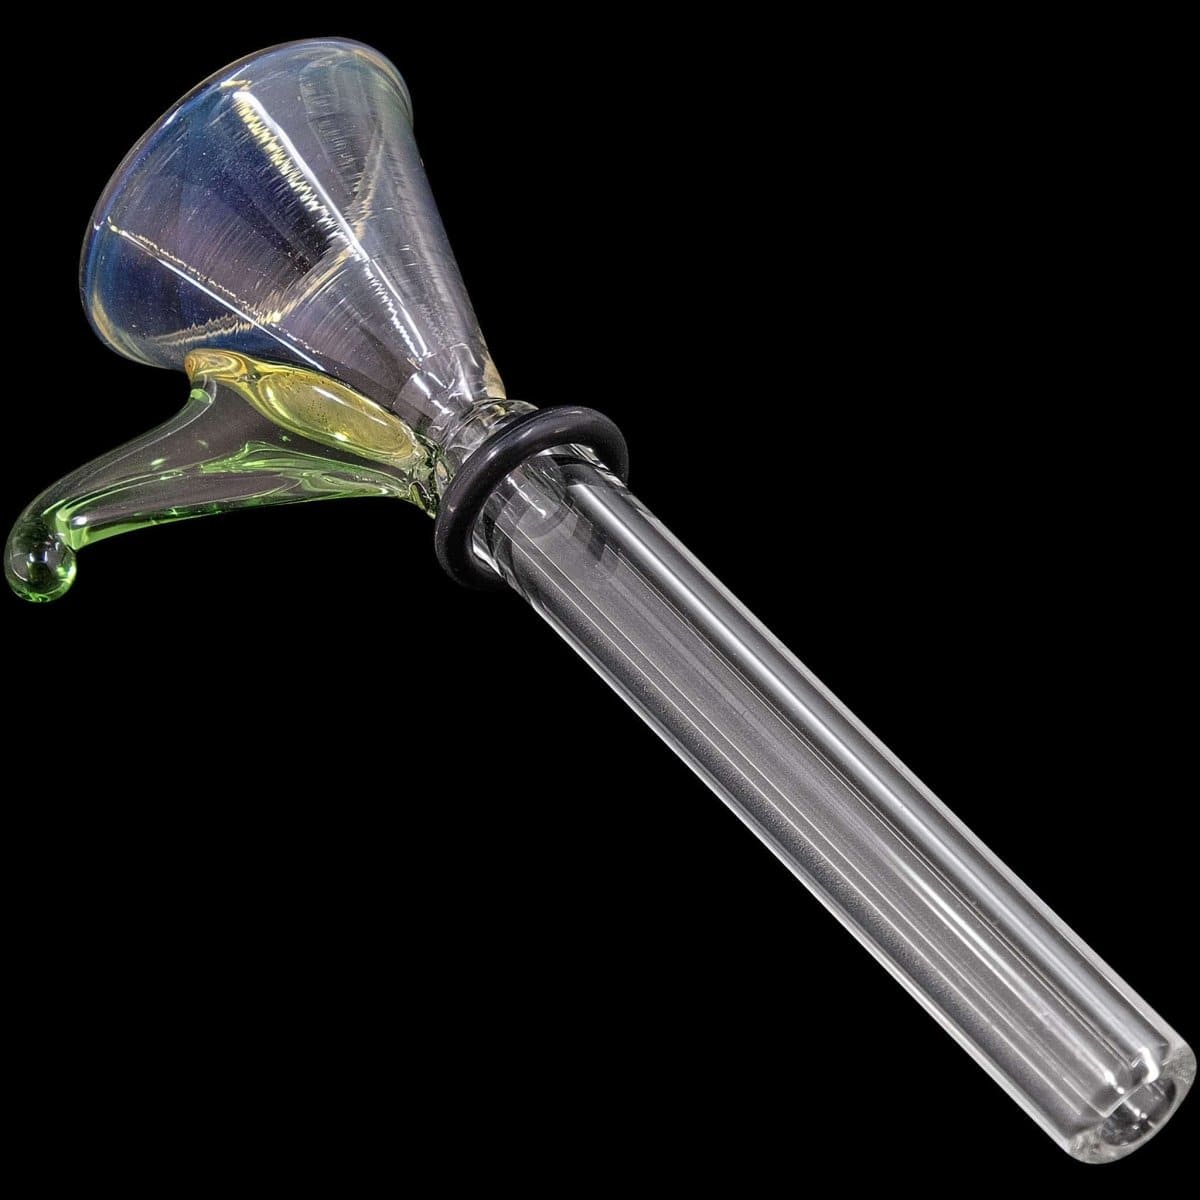 LA Pipes Smoking Accessory Green 9mm Funnel Slide Bowl with Handle for Pull-Stem Bongs